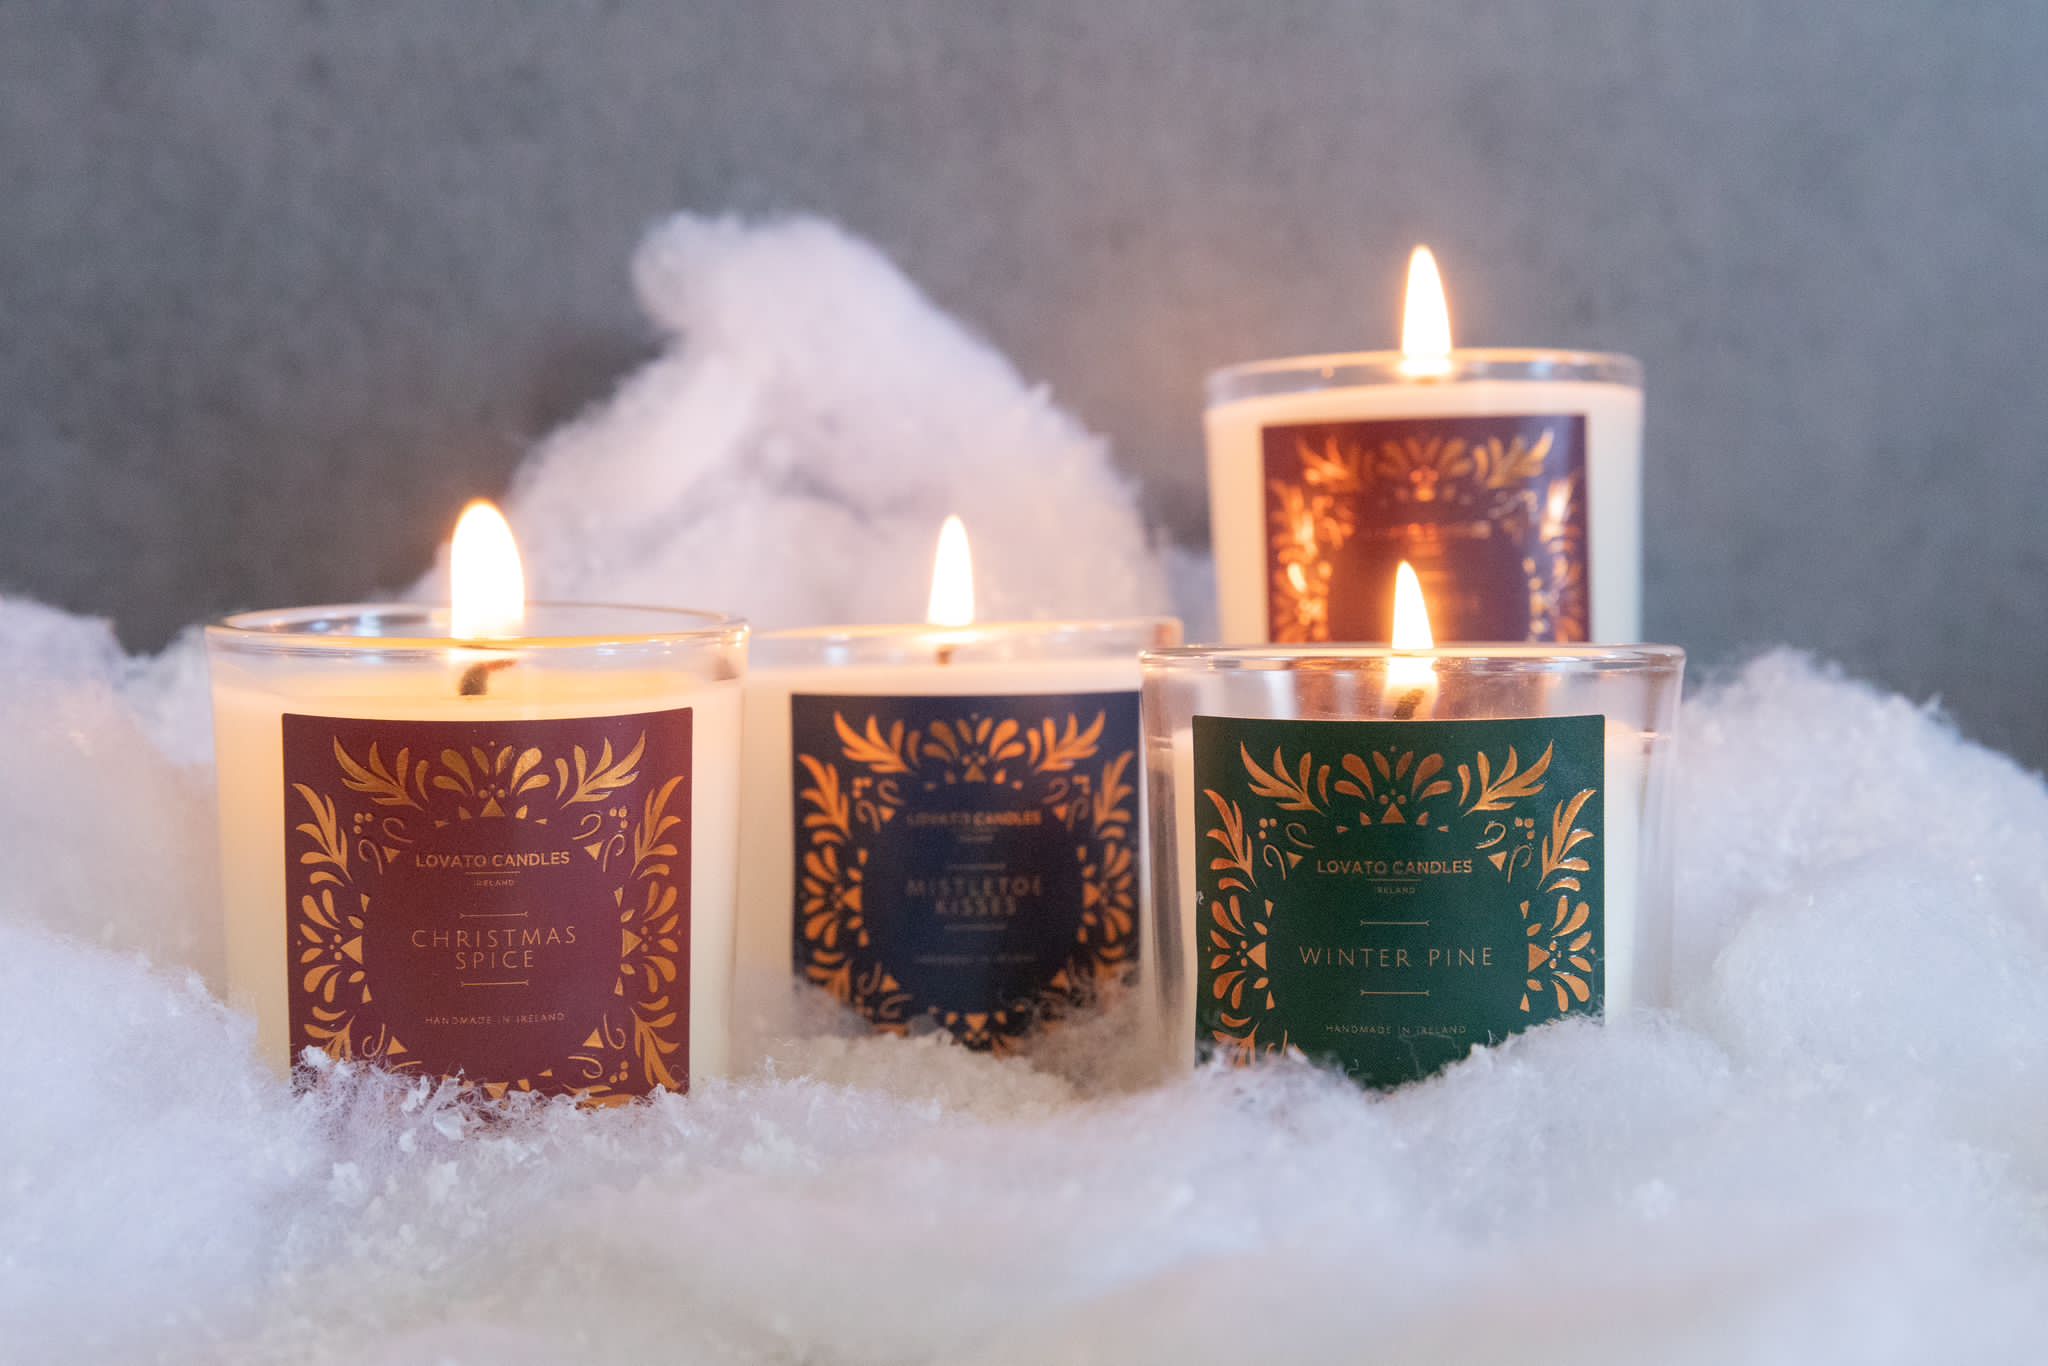 Pour l'air scented candles - making scents of stories